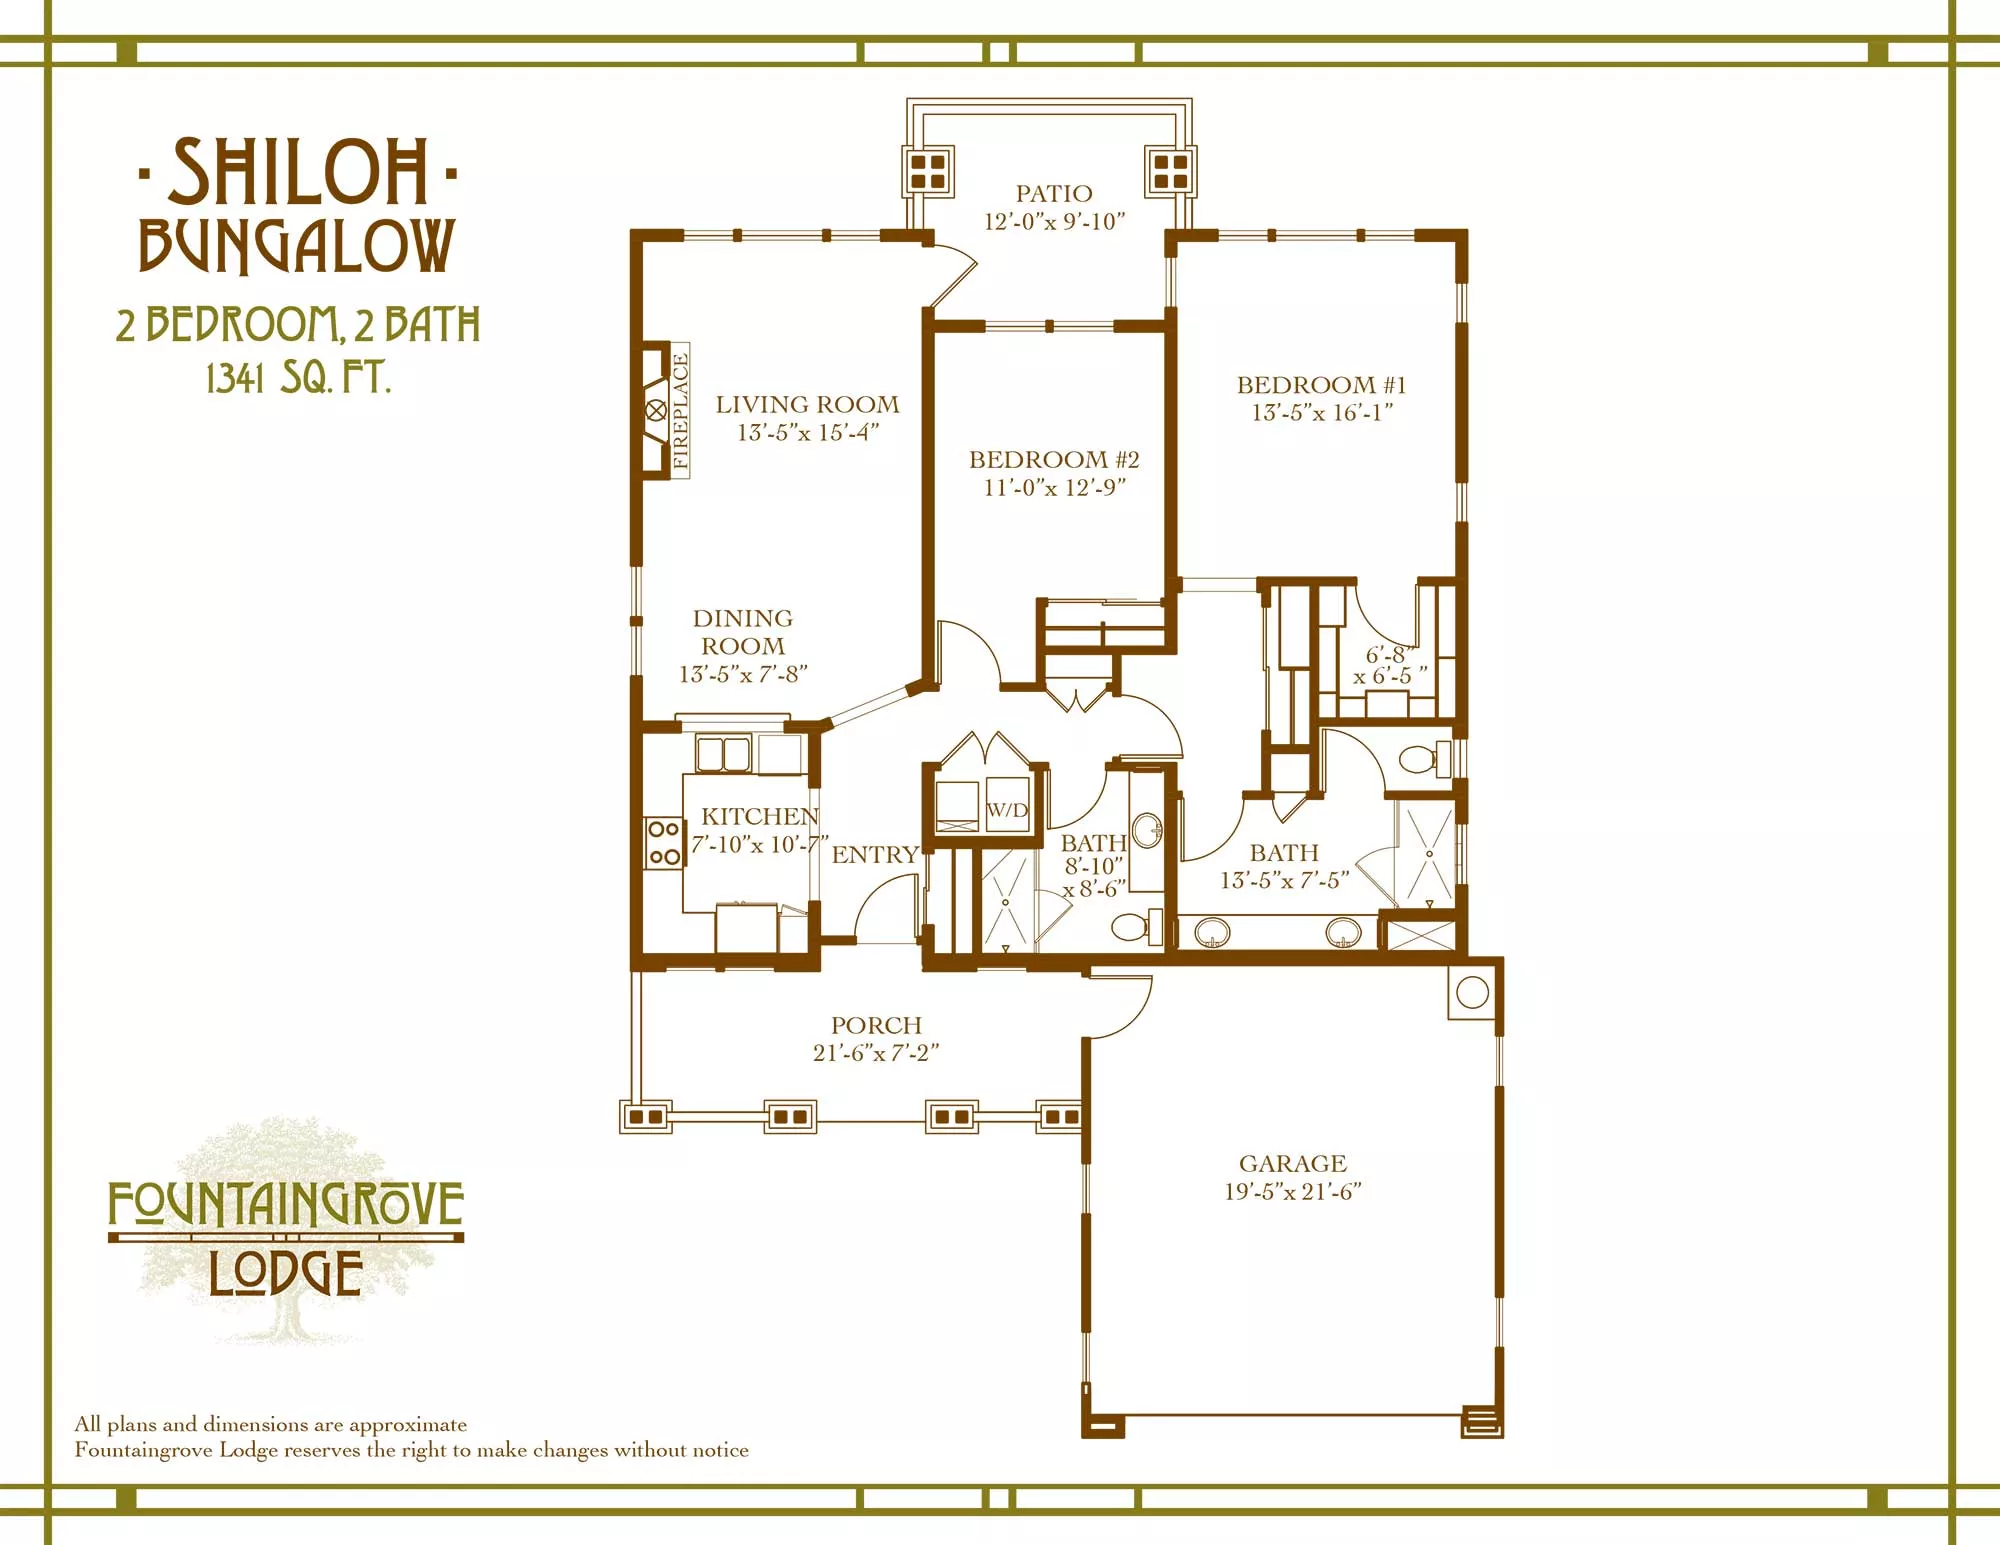 Shiloh two bedroom and two bath floor plan